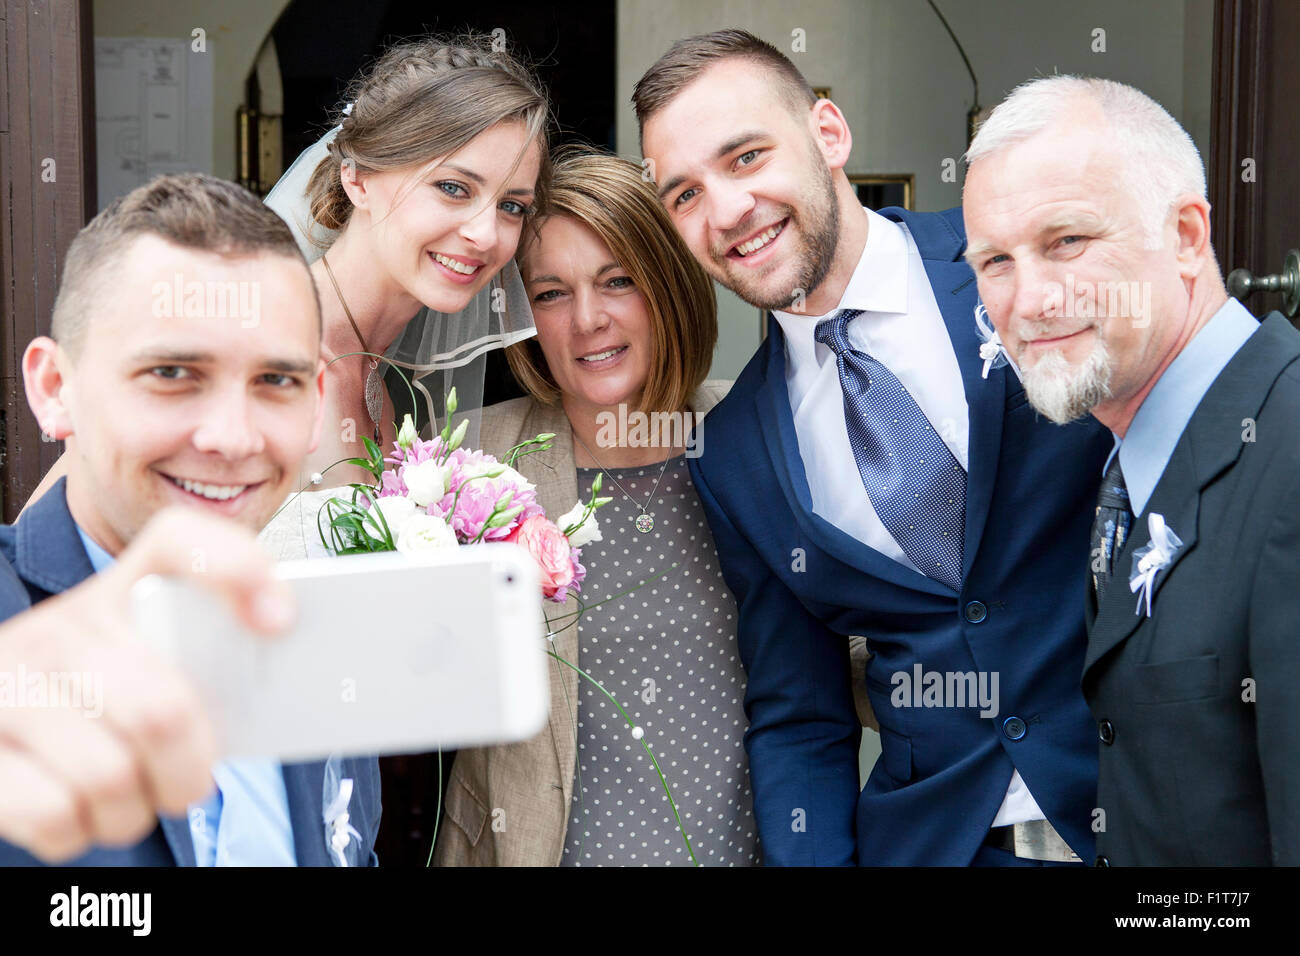 Groom, bride and family taking photo of themselves Stock Photo